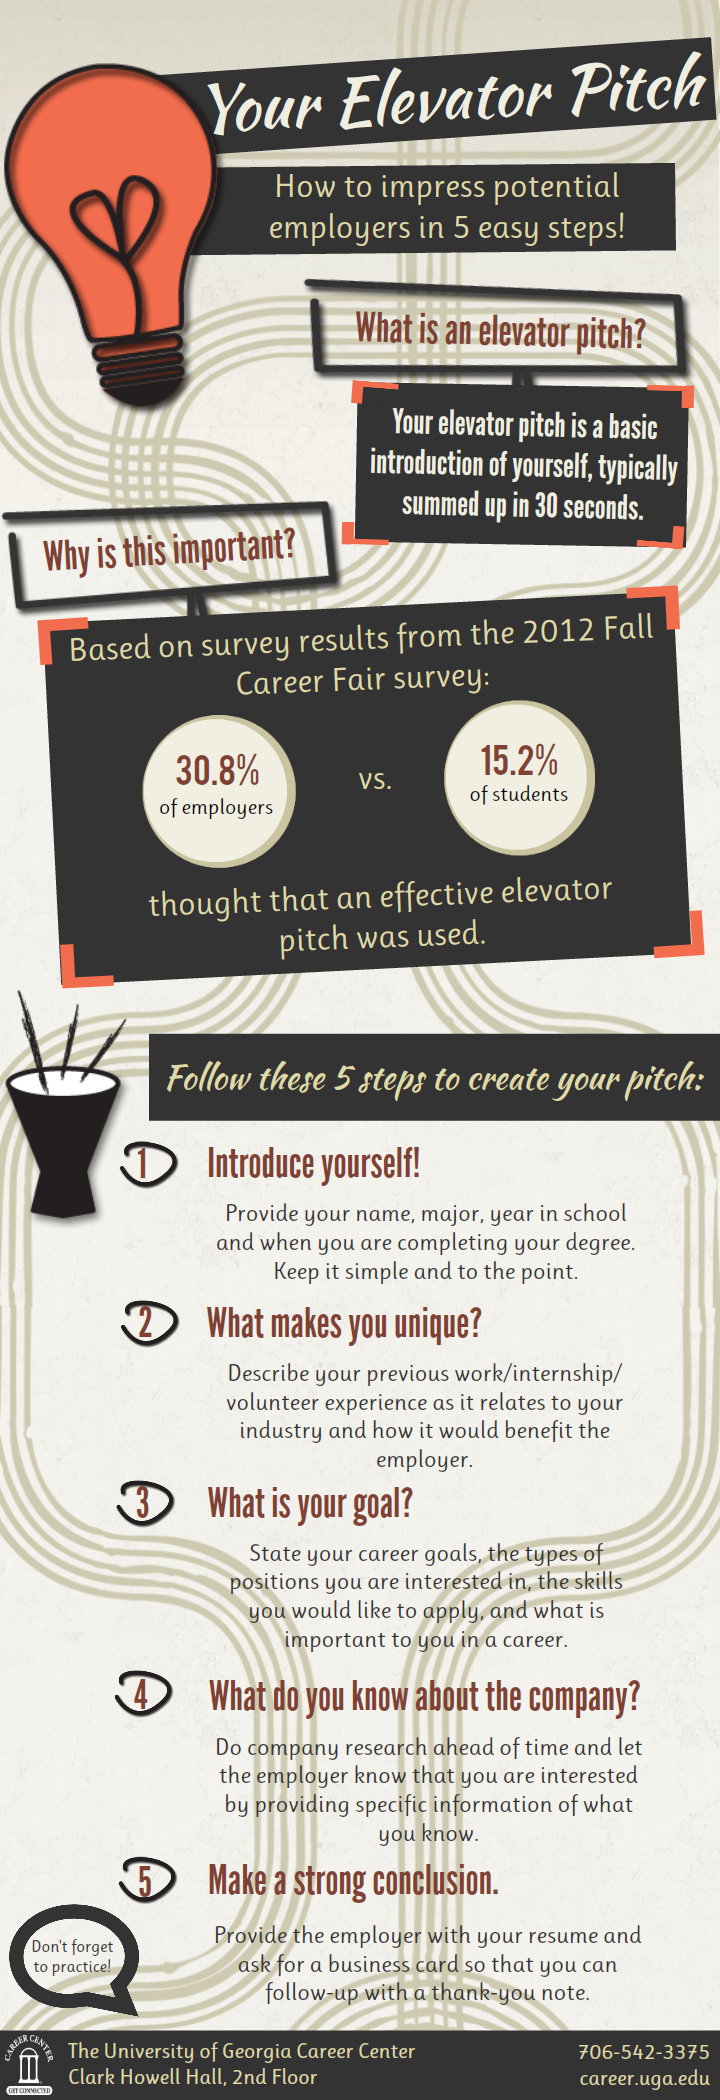 Elevator Pitch Tips And Tricks Infographic
